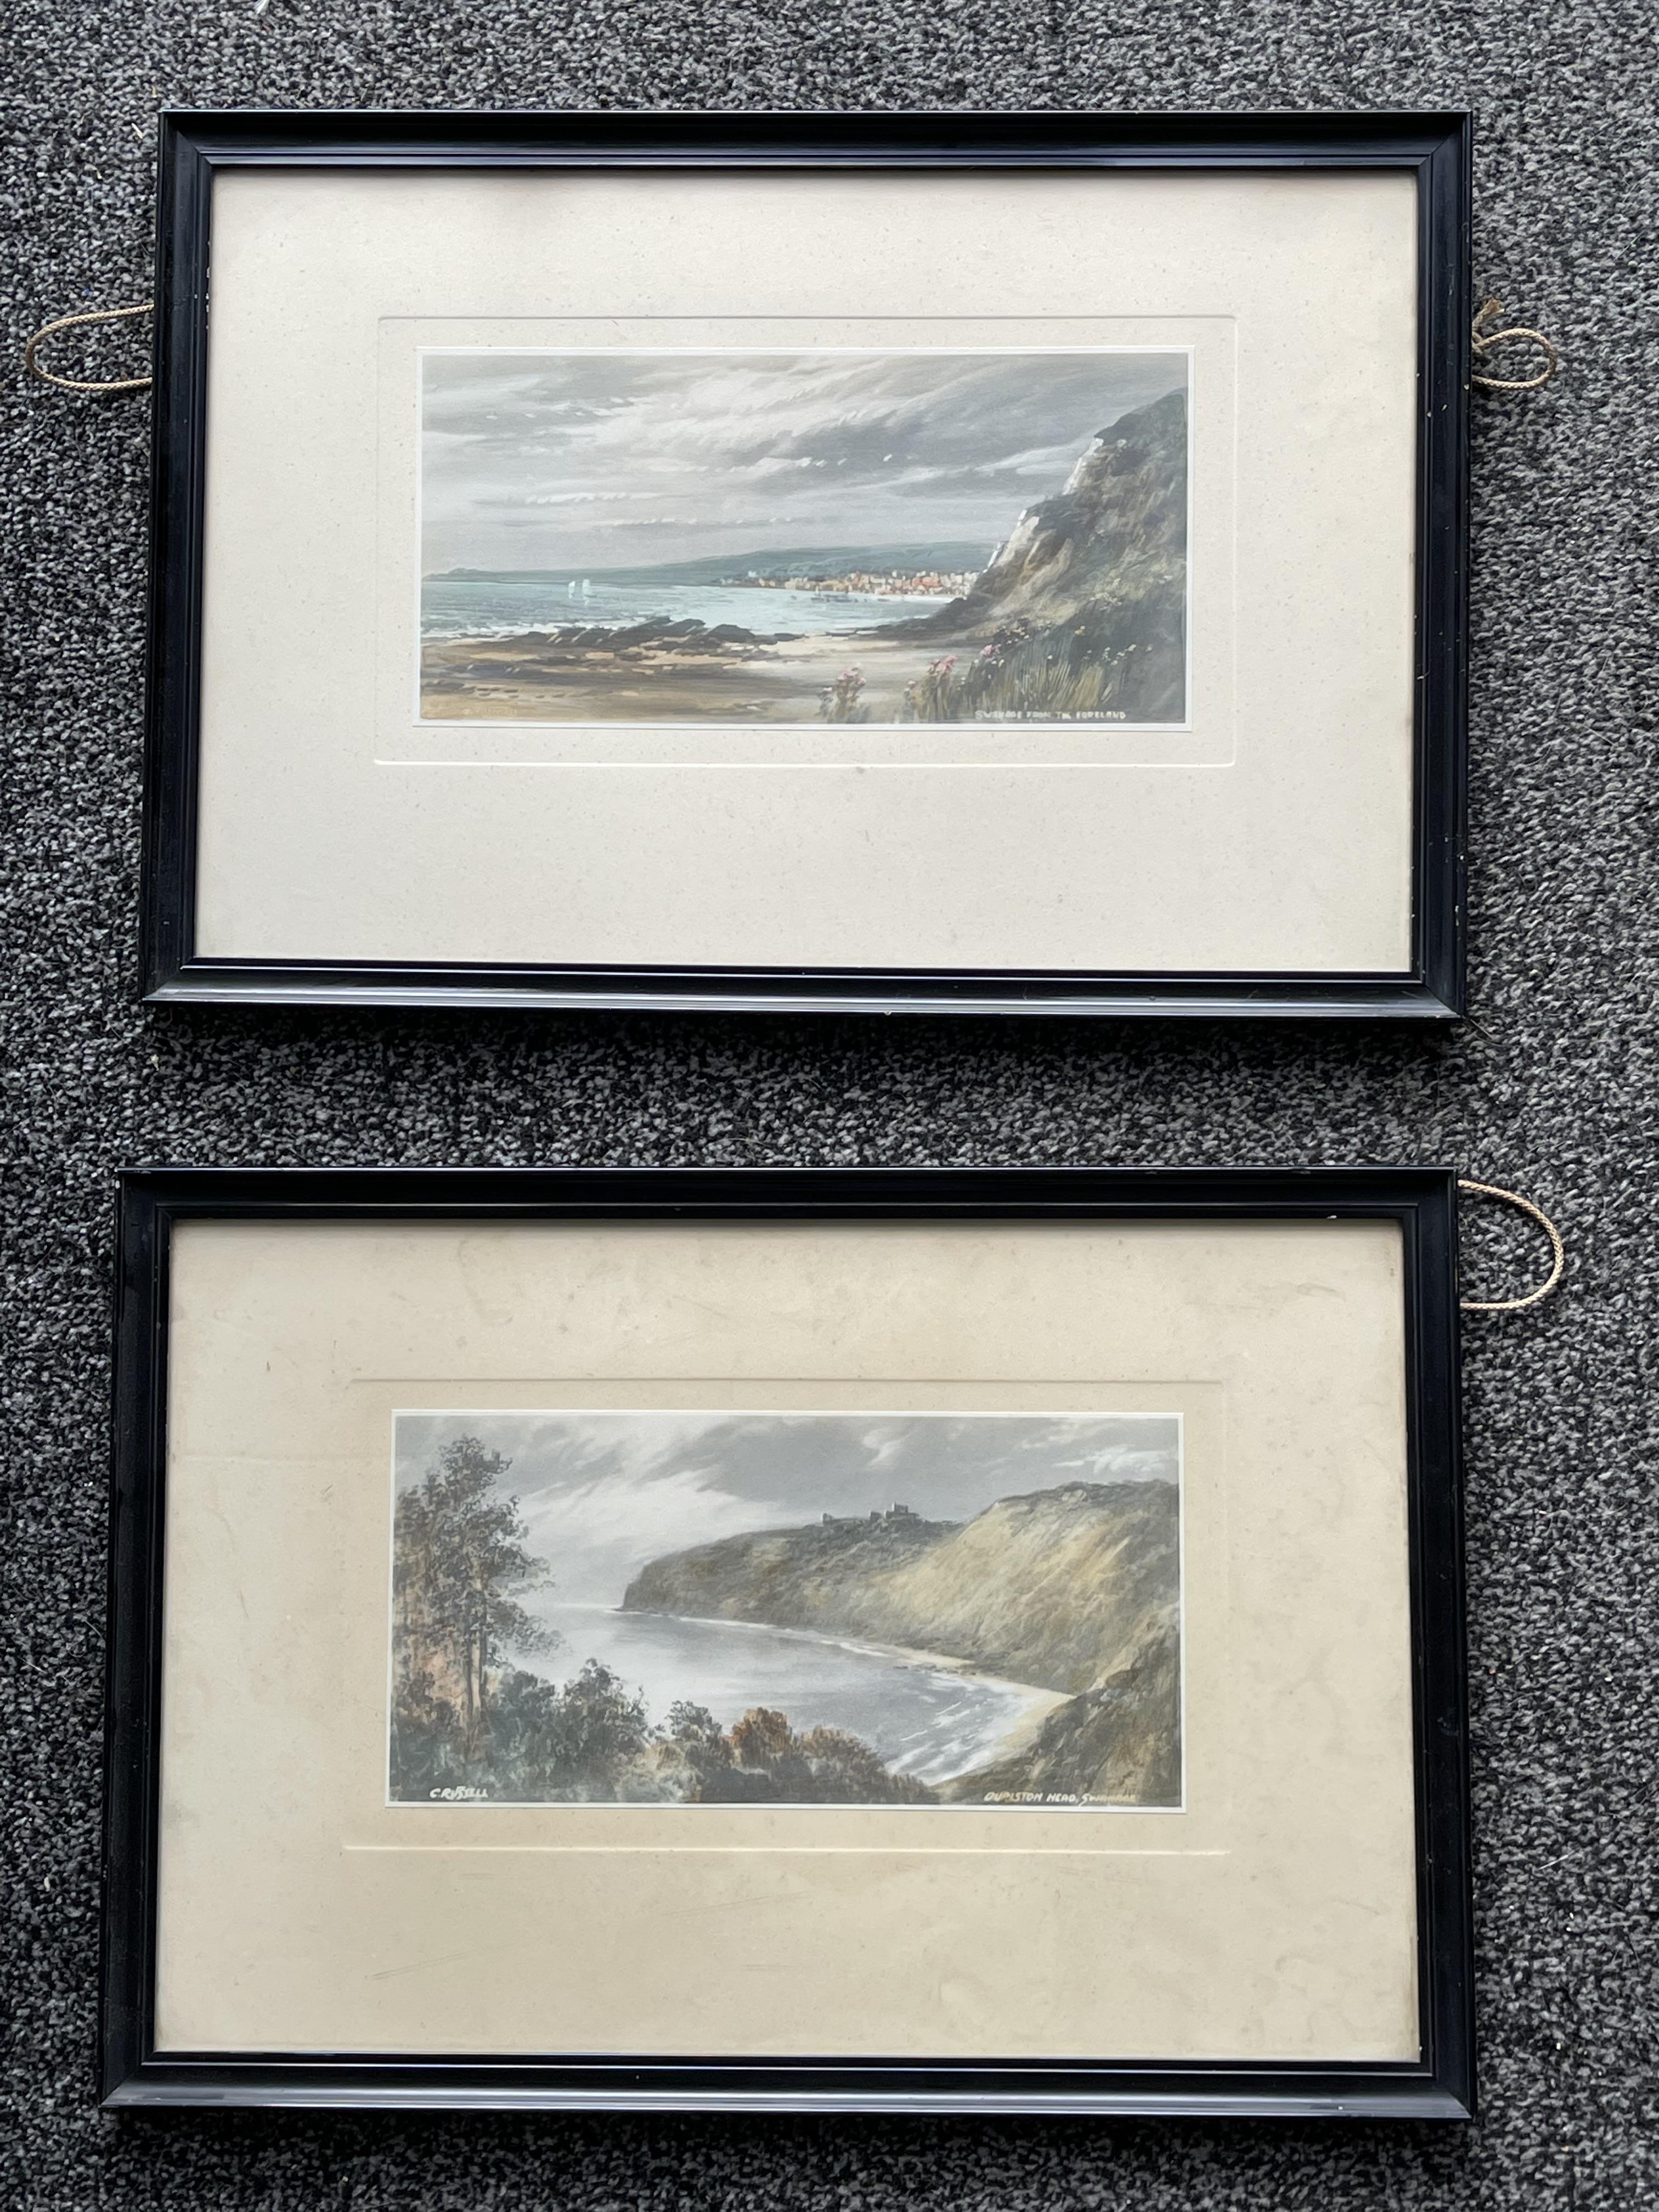 Pair of prints by C. Russel. - Image 18 of 18